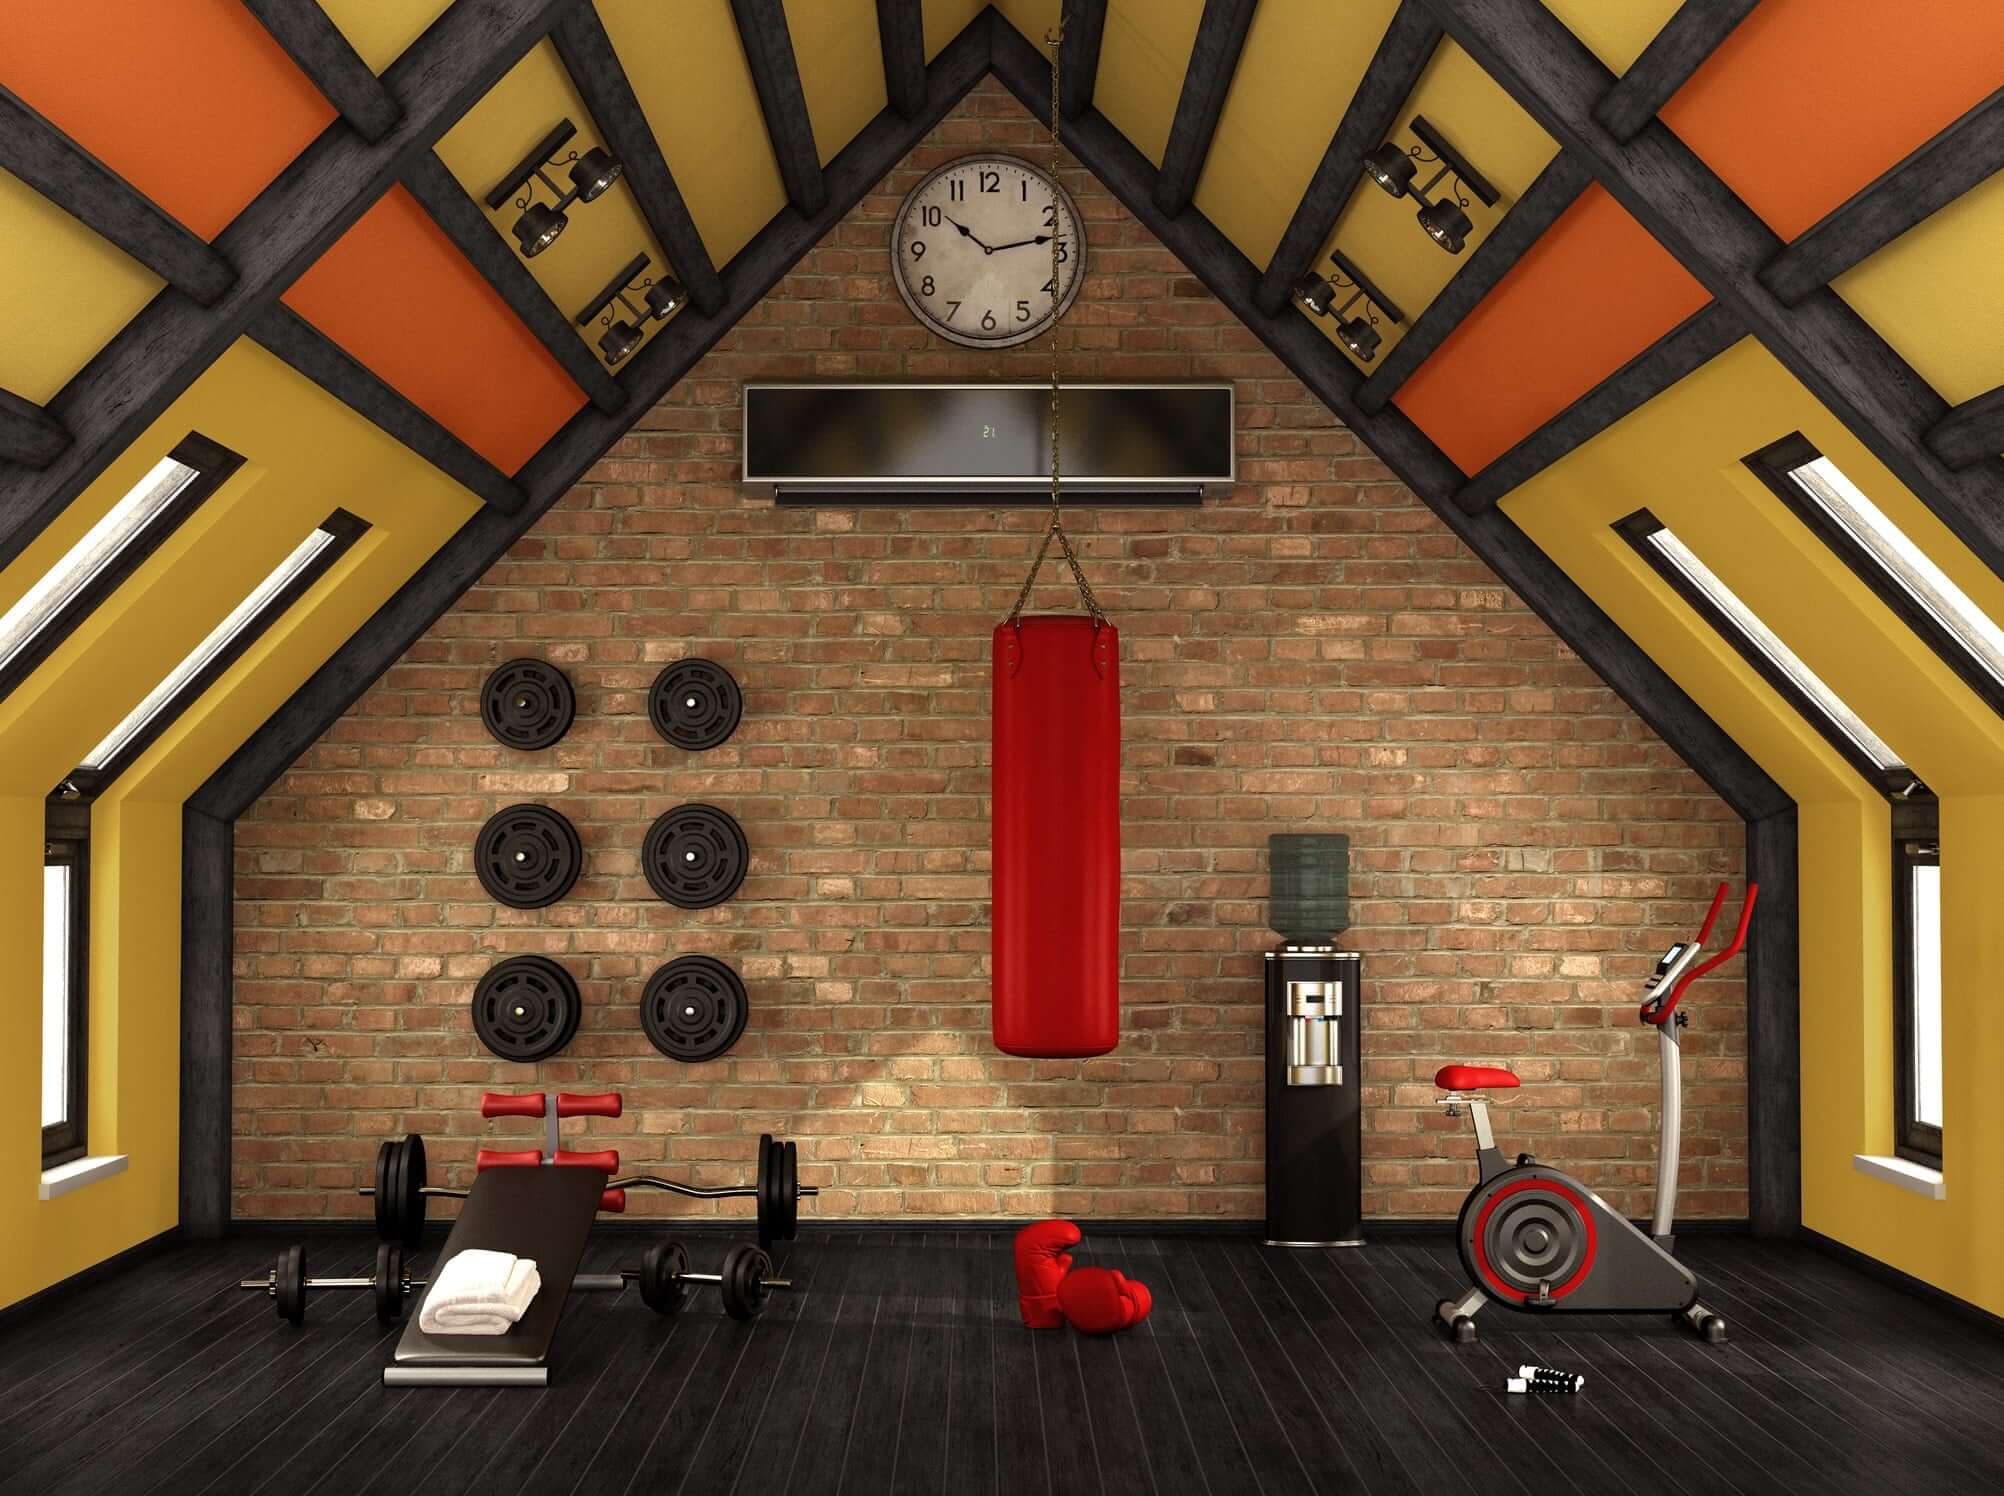 At-Home Gyms May Come With These IAQ Concerns